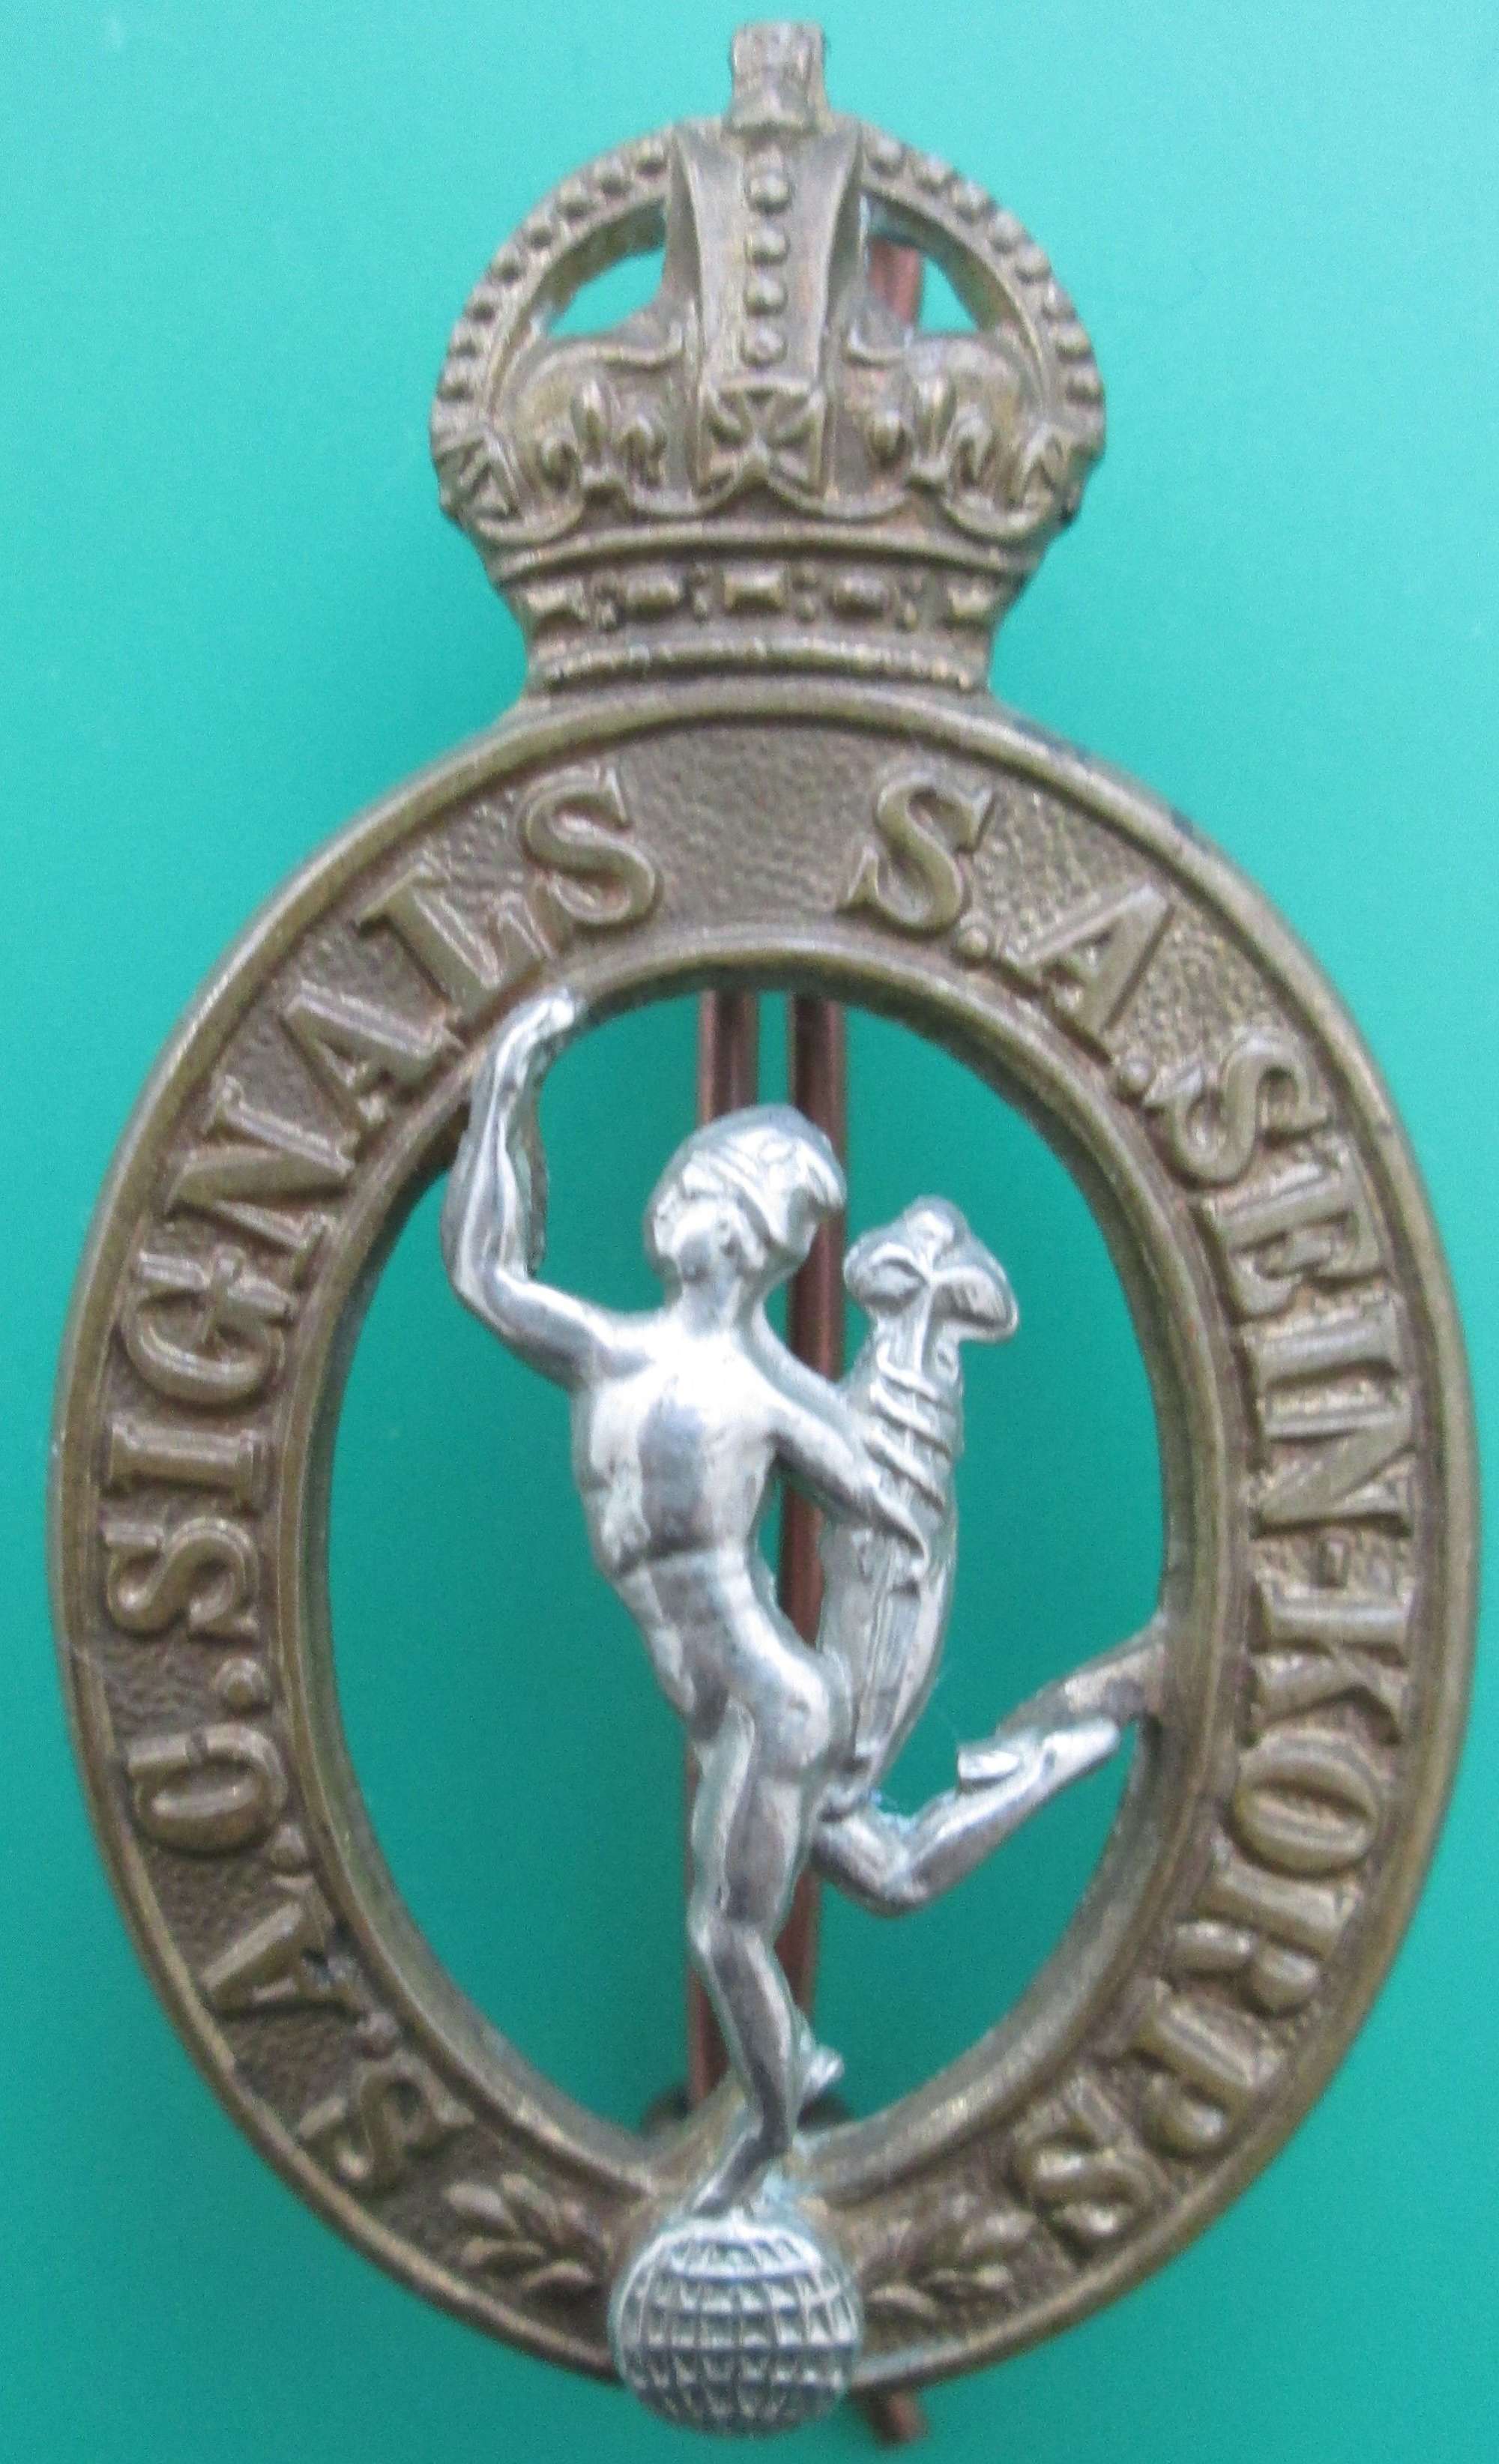 A SOUTH AFRICAN CORPS OF SIGNALS CAP BADGE